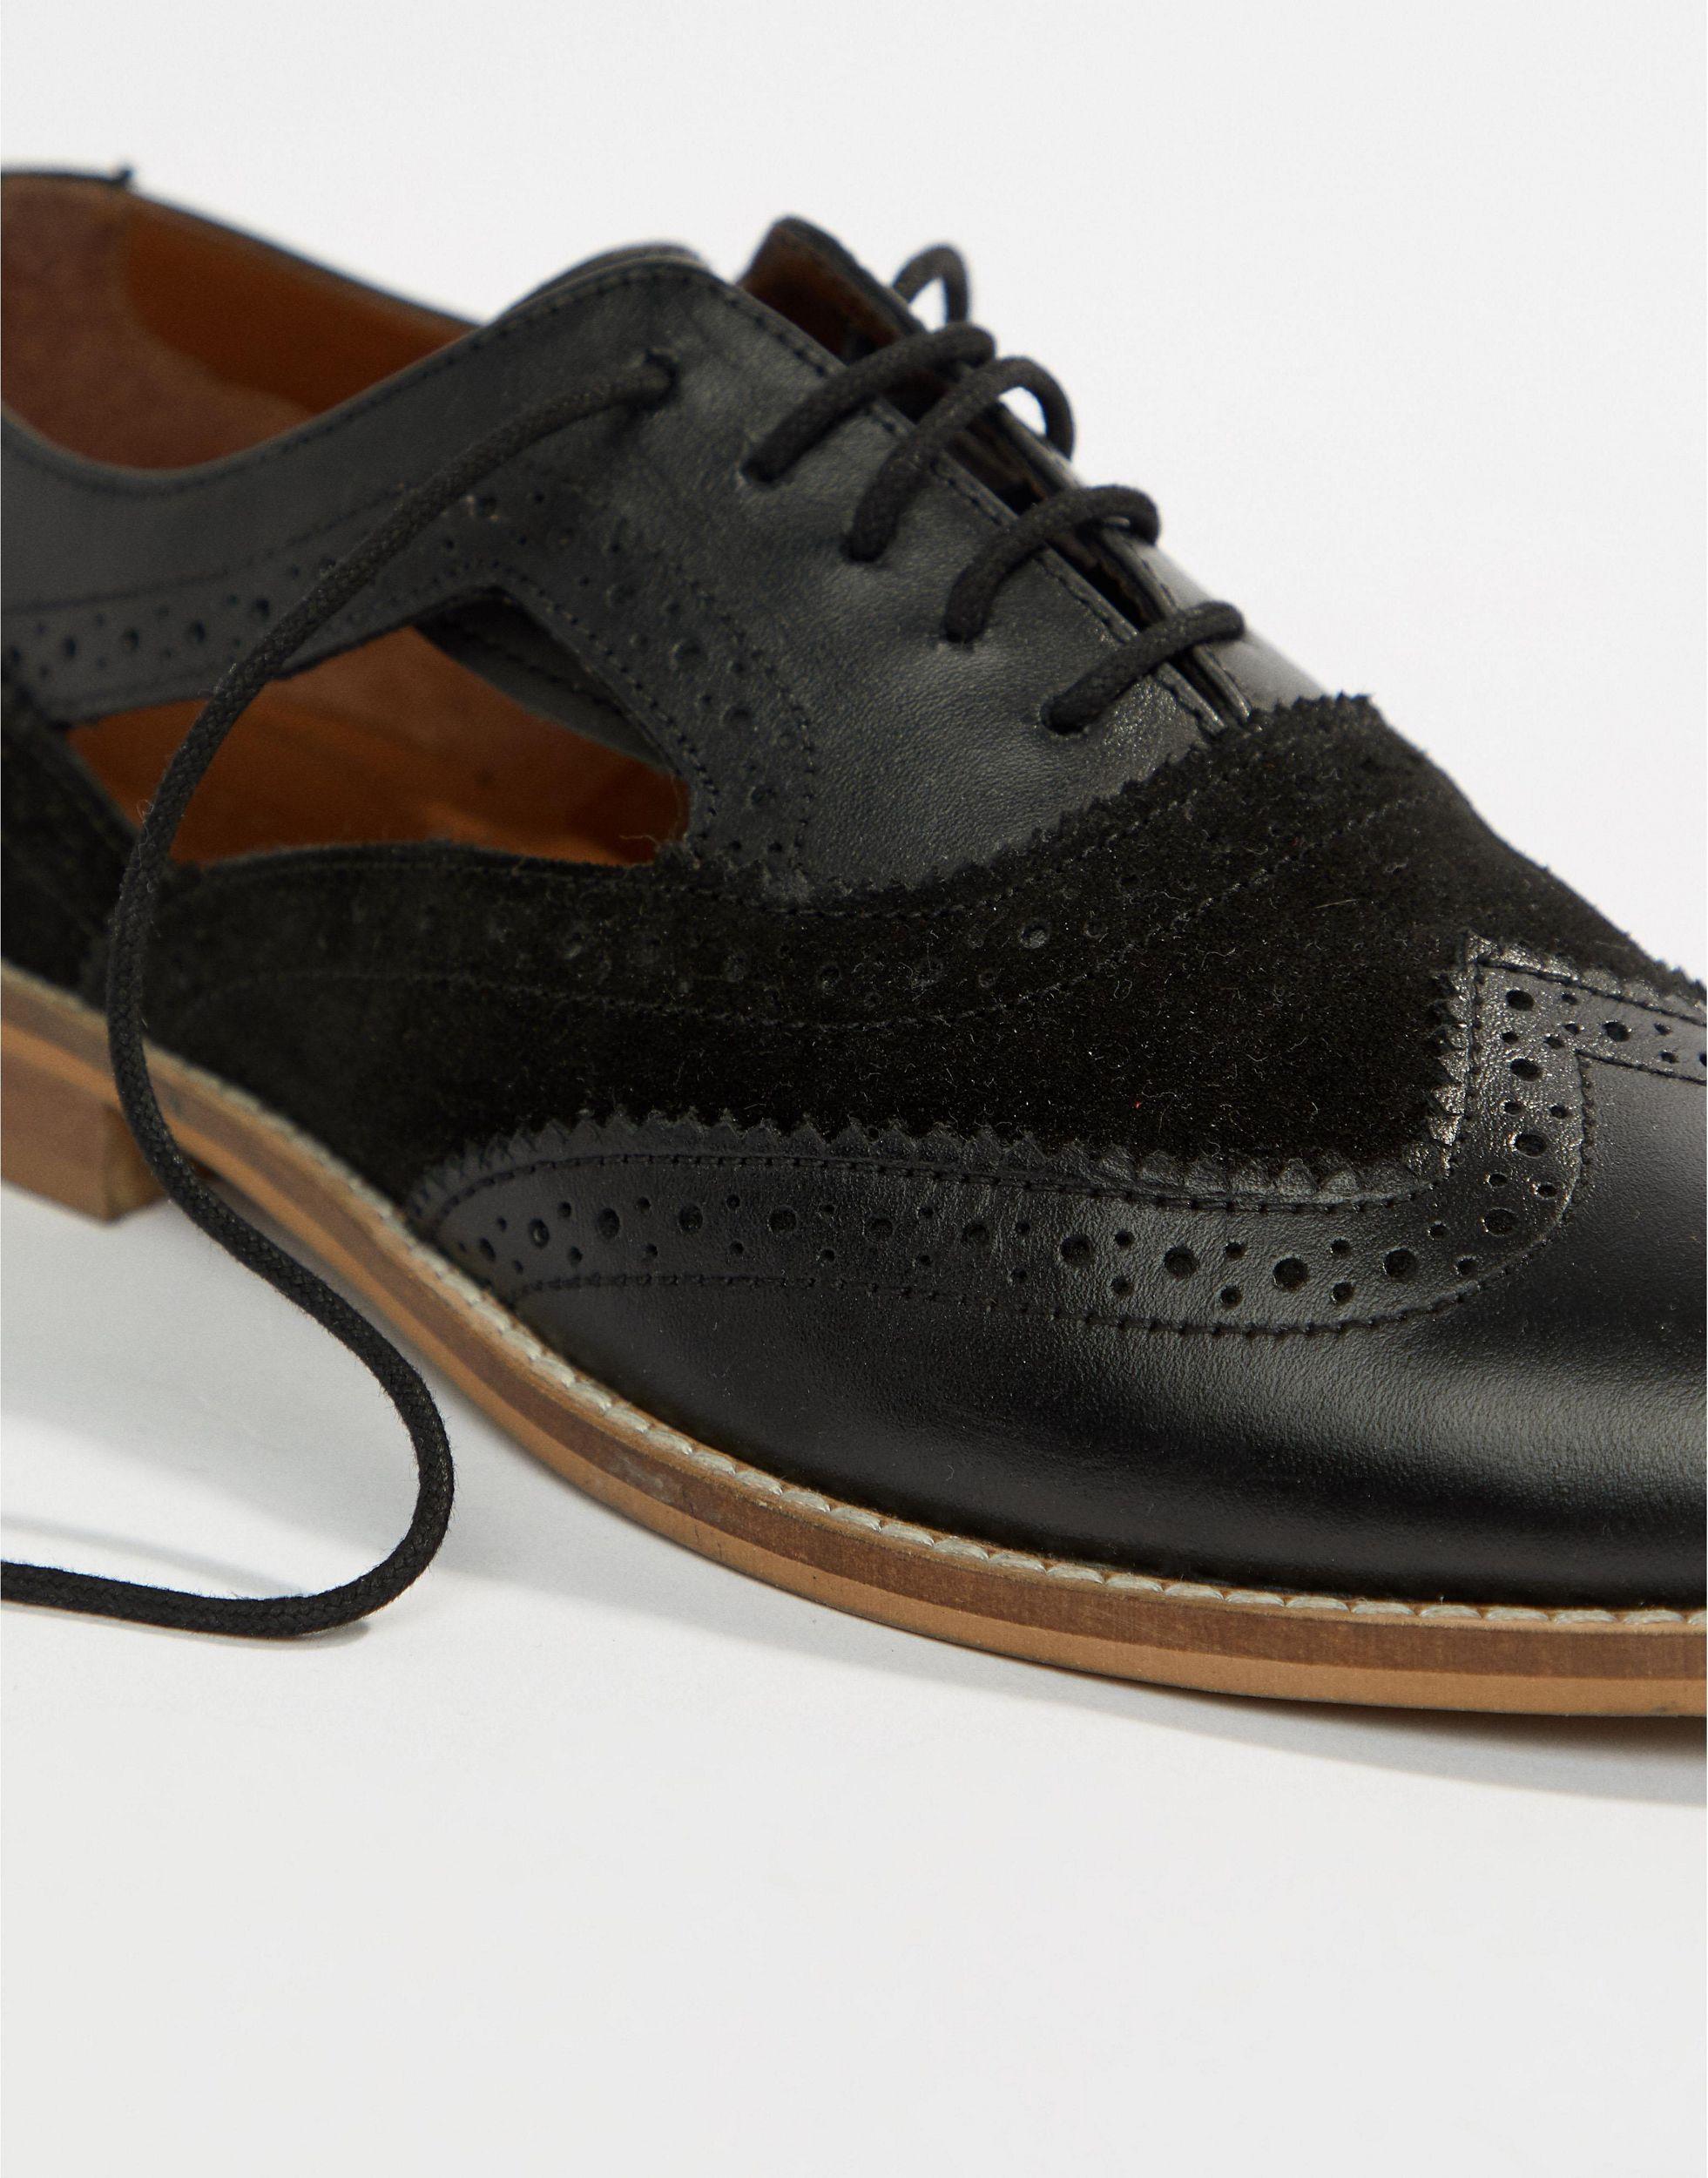 ASOS Milton Leather Flat Cut Out Brogue in Black - Lyst